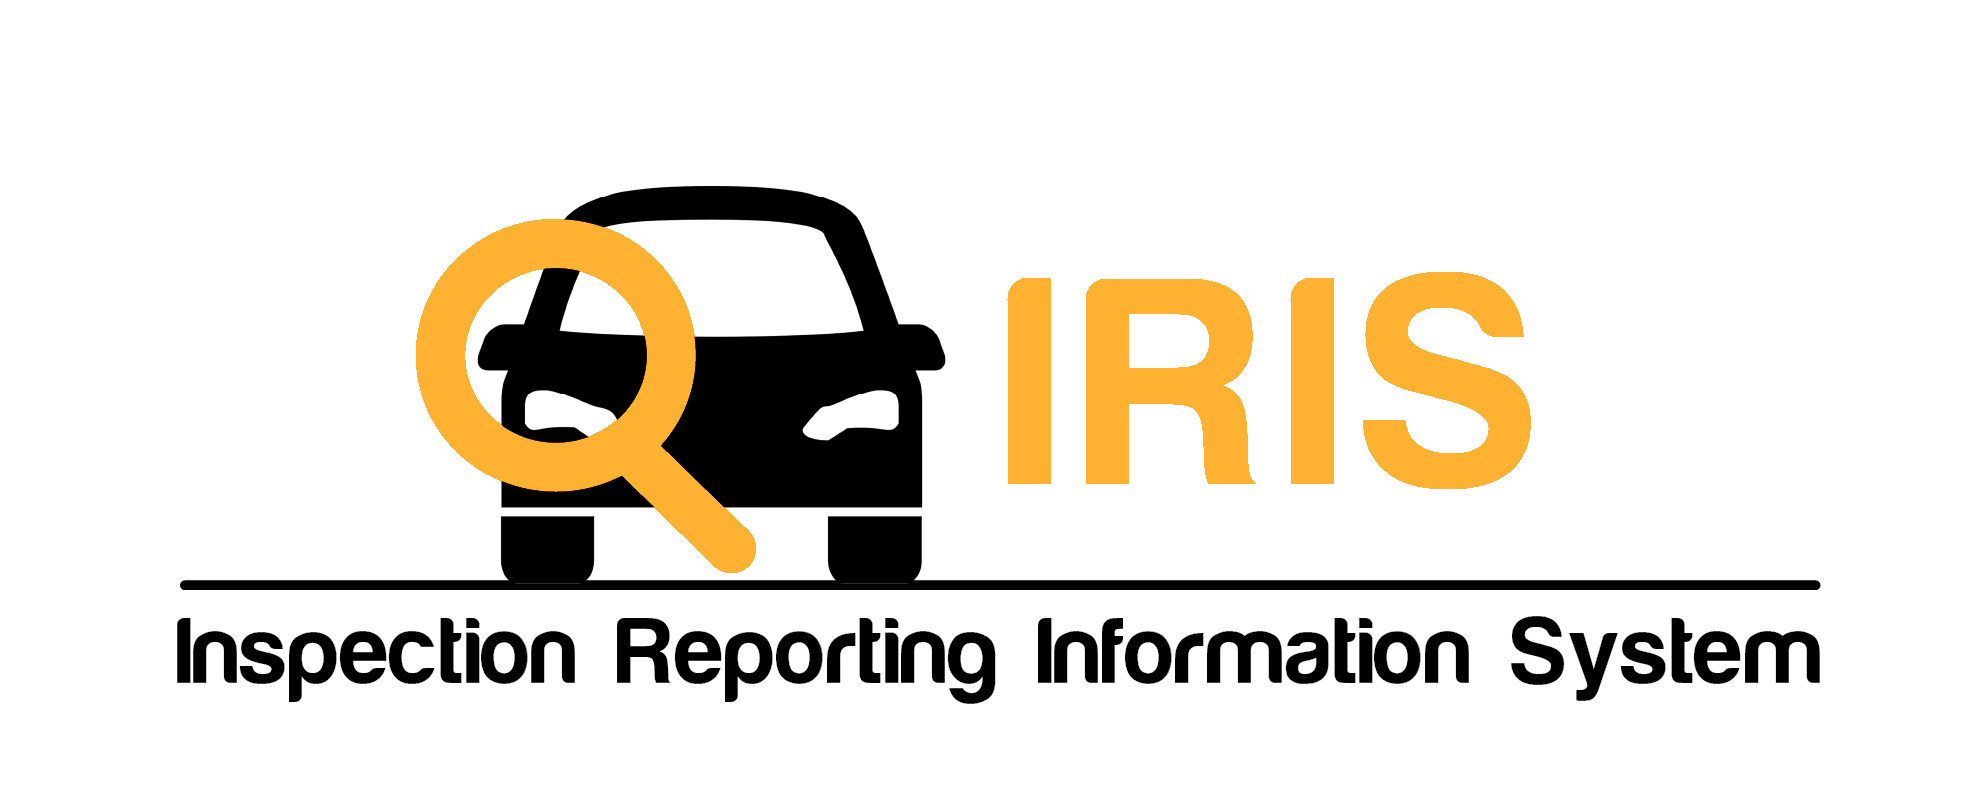 IRIS - Inspection Reporting Information System